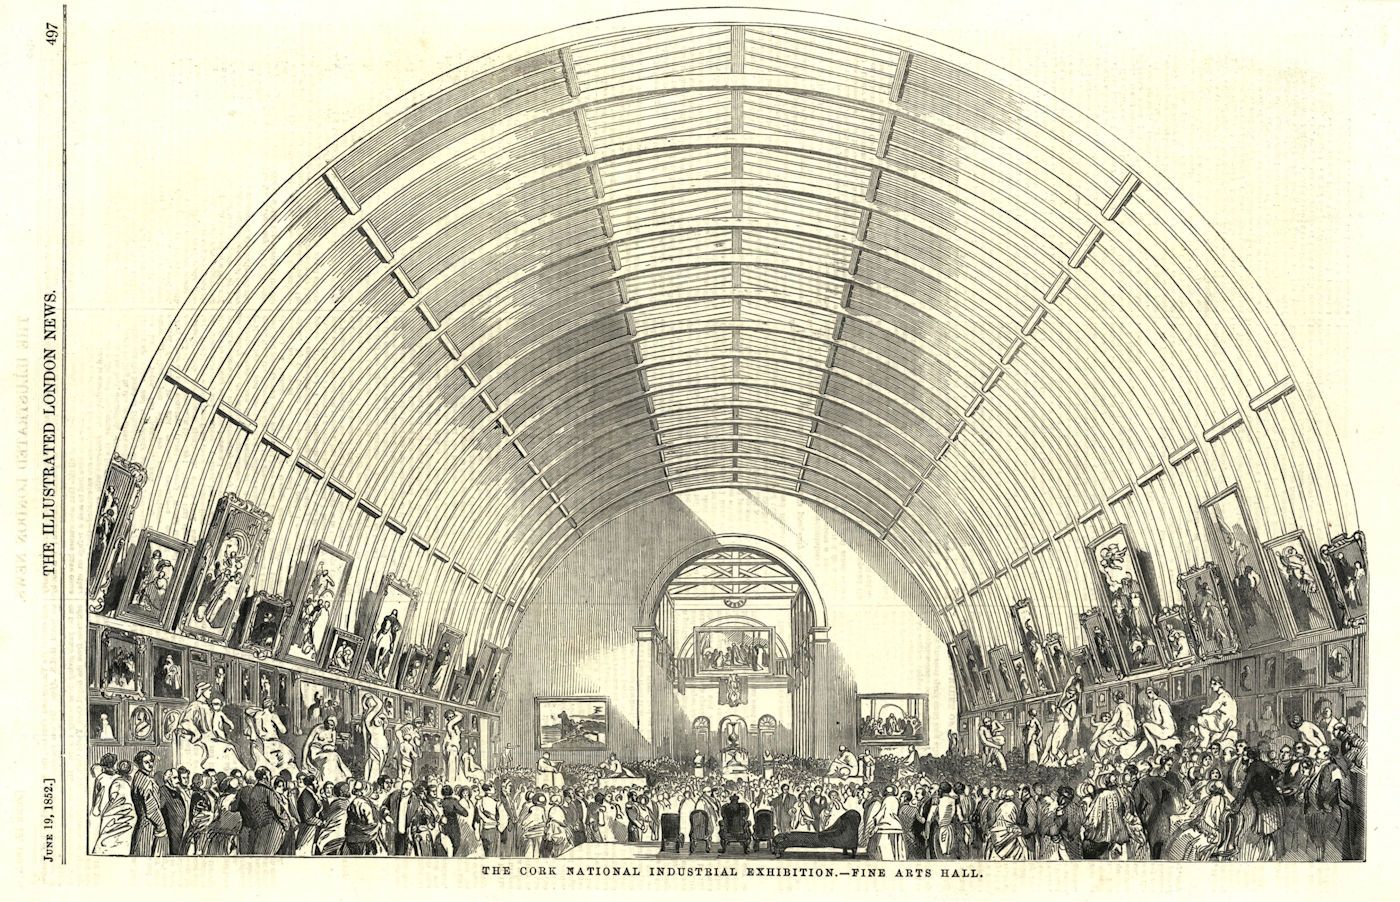 The Cork National Industrial Exhibition - Fine Arts Hall. Ireland. Business 1852